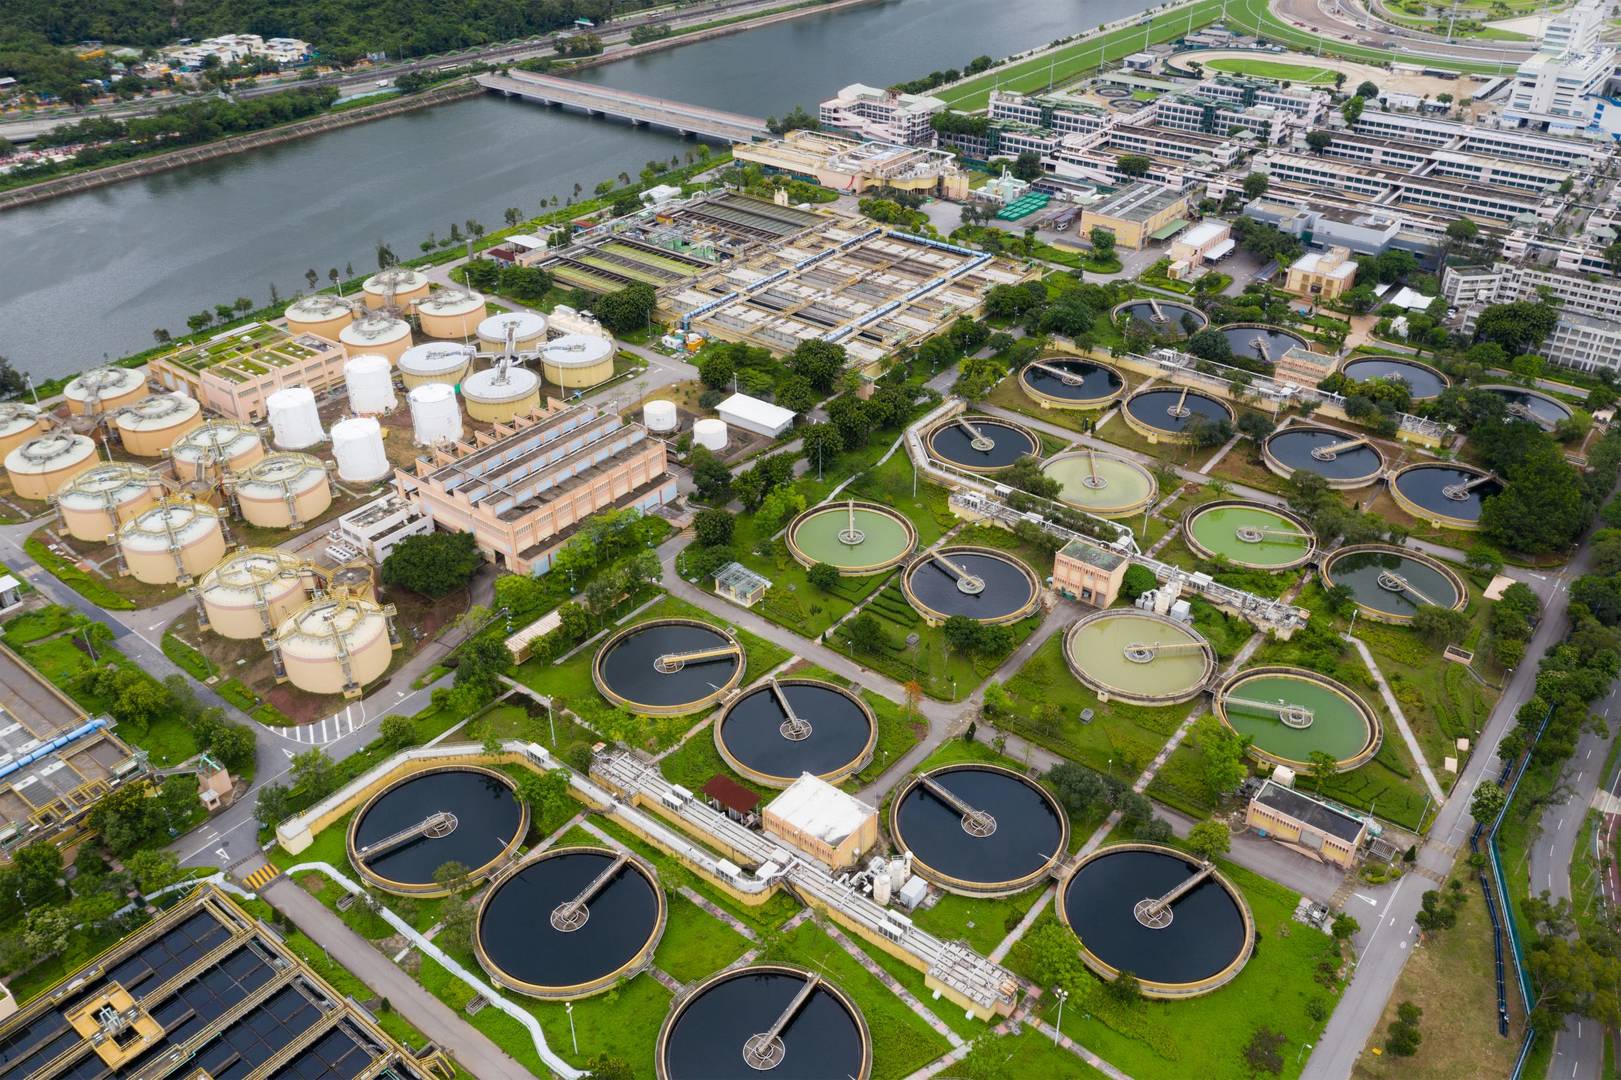 Wastewater to hydrogen: the fuel of the future?